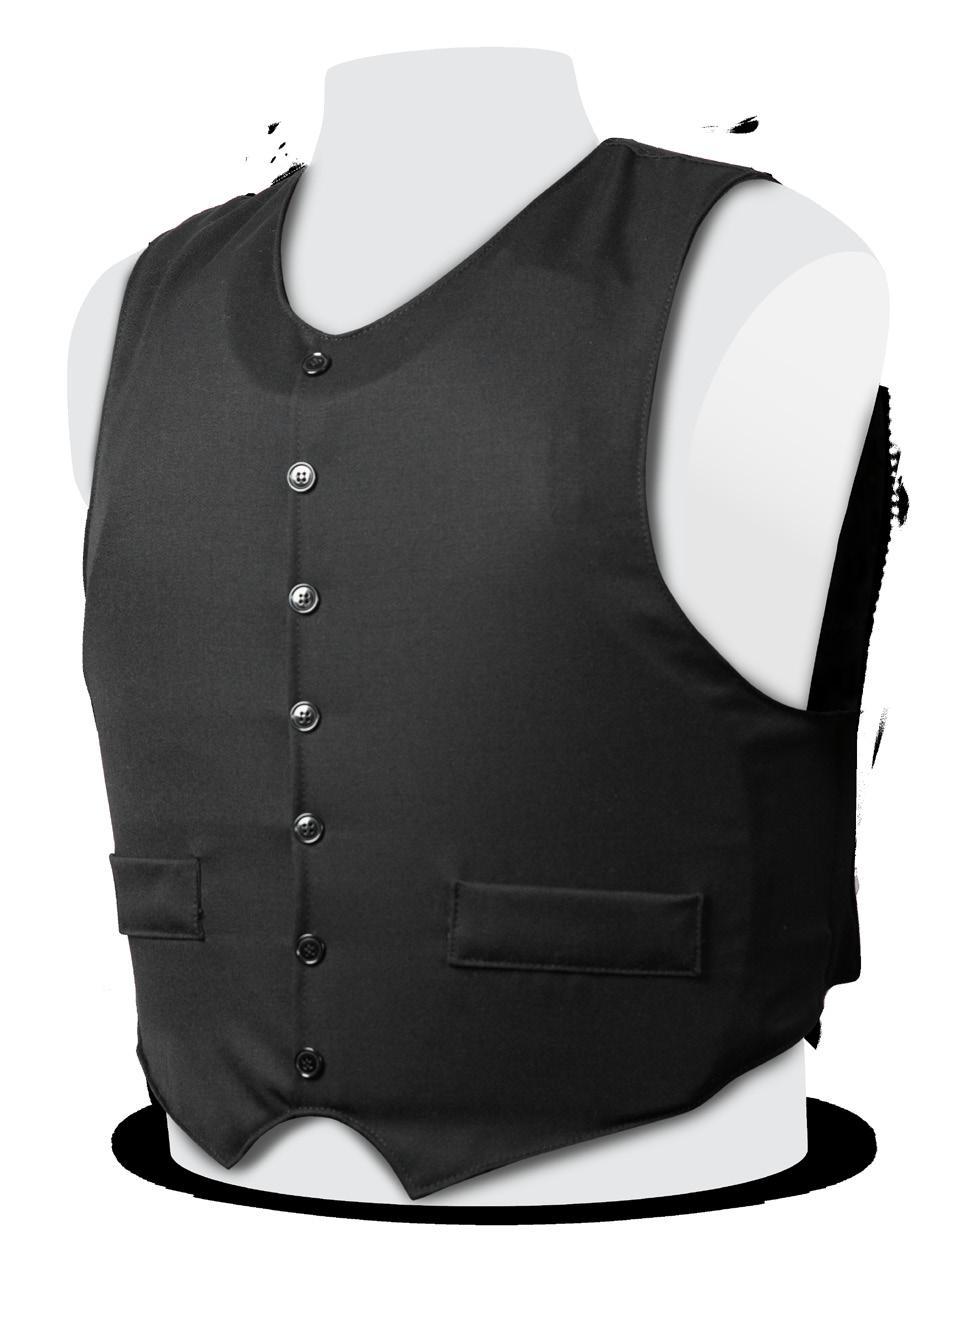 Bullet Resistant Vest - EV2 Model #: 500117 Protection Level: NIJ Level IIIA+ This outstanding bullet resistant vest has not only passed the most up to date National Institute of Justice Standard